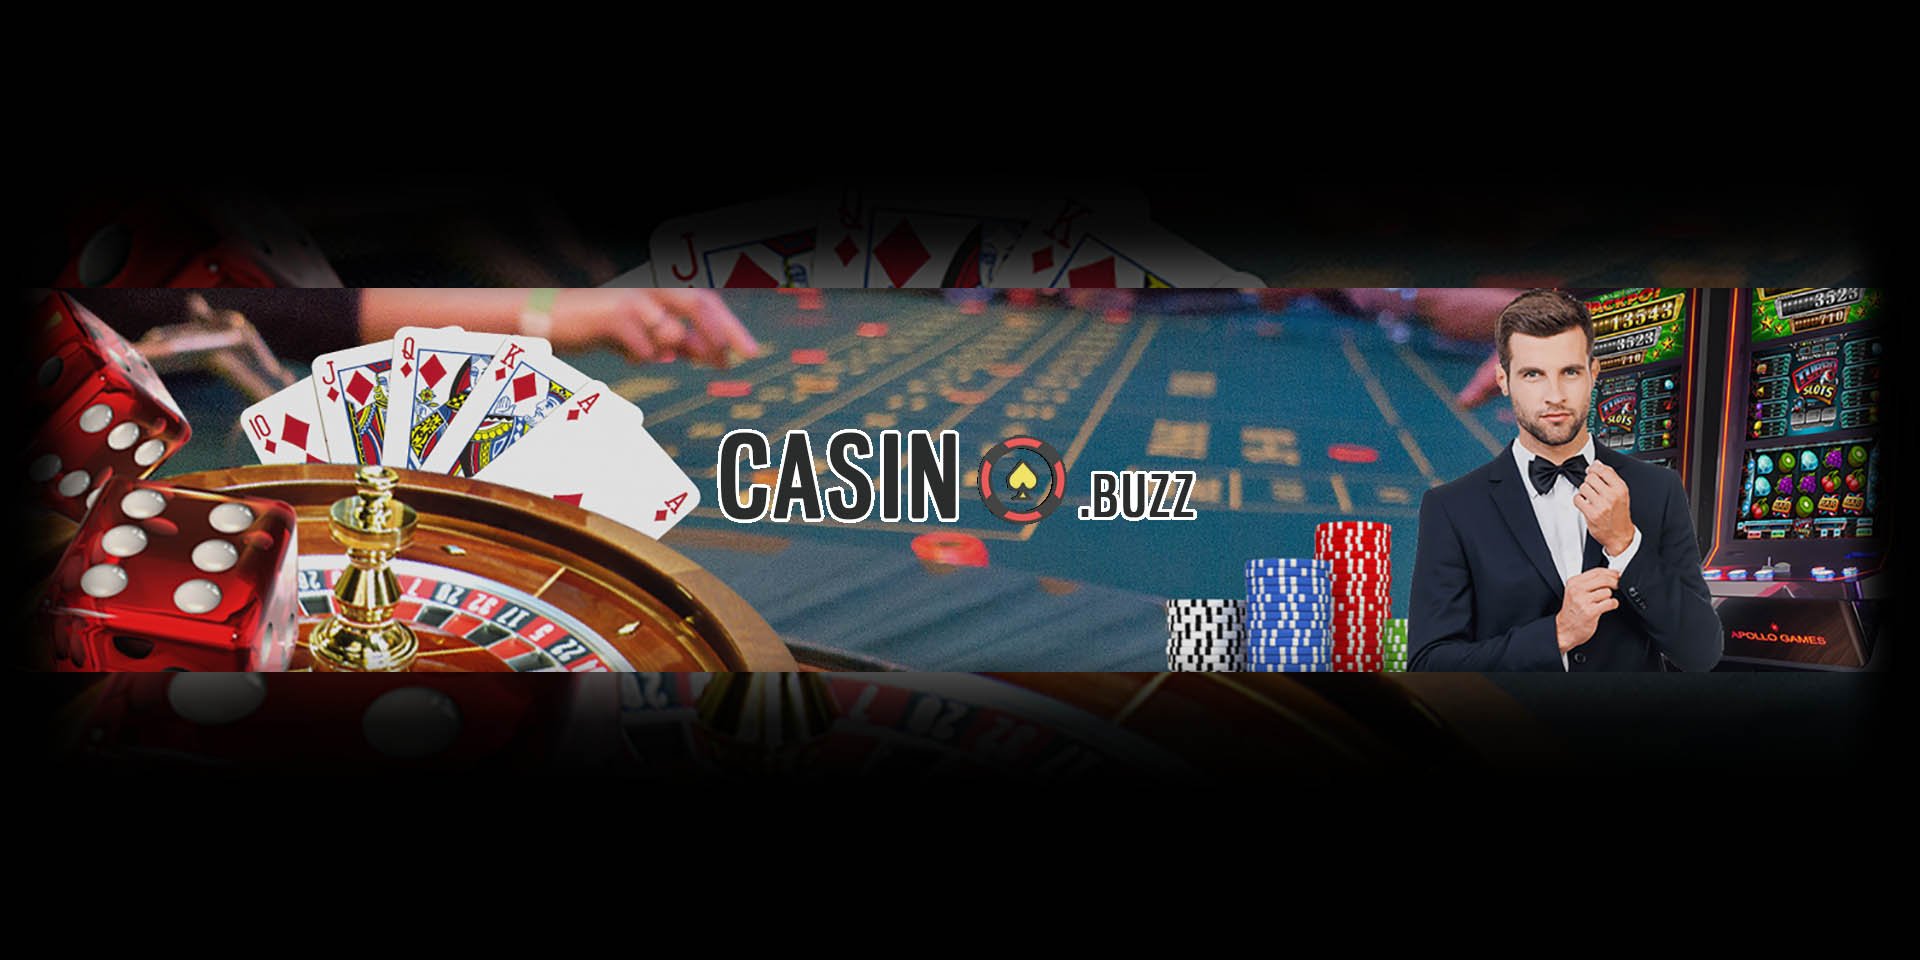 New Online Casino Reviews Website Launched - Casino.buzz